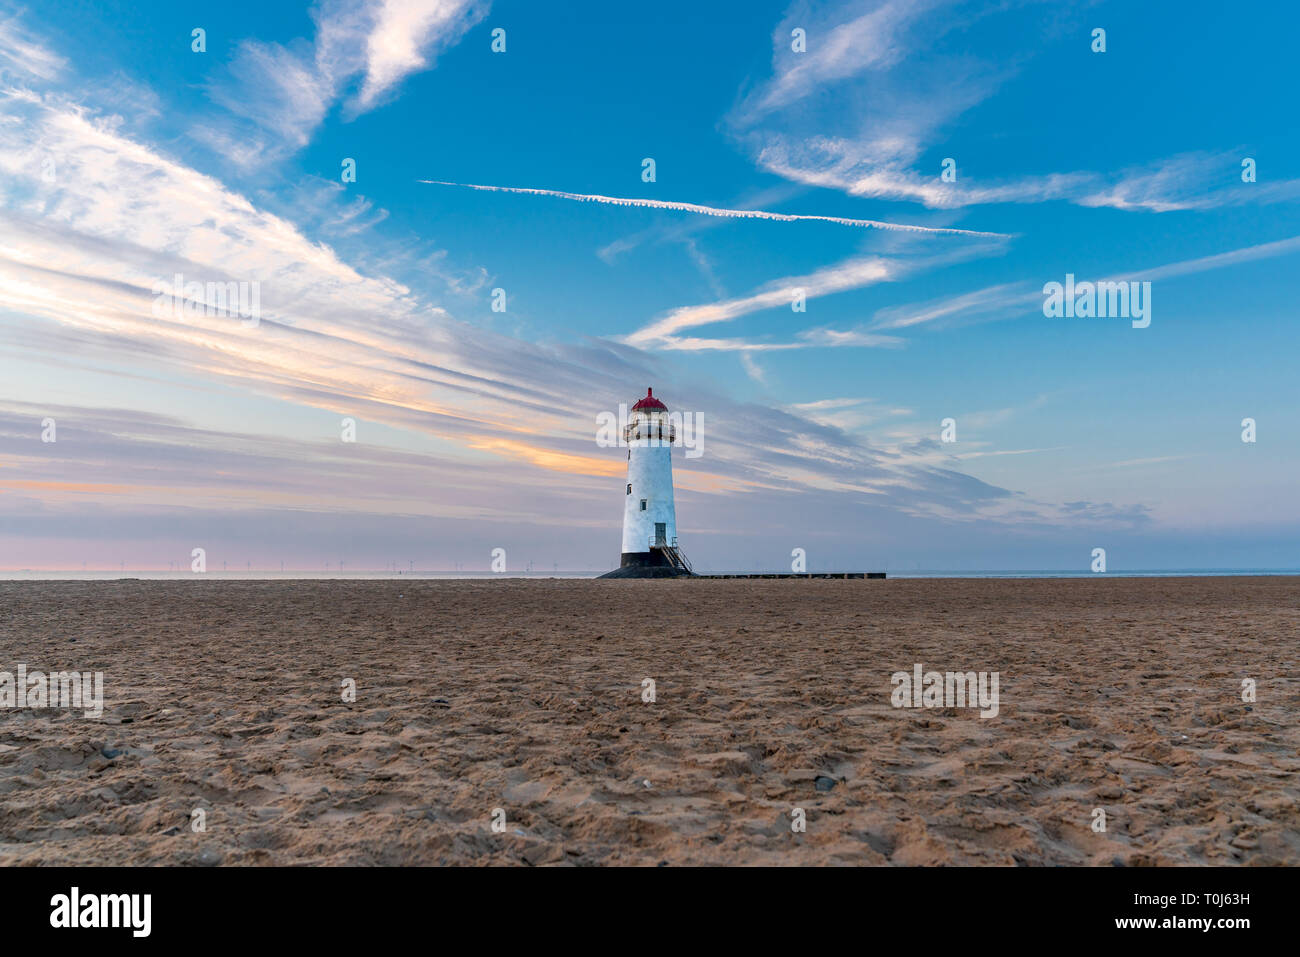 Evening at the Point of Ayr Lighthouse near Talacre, Flintshire, Clwyd, Wales, UK Stock Photo